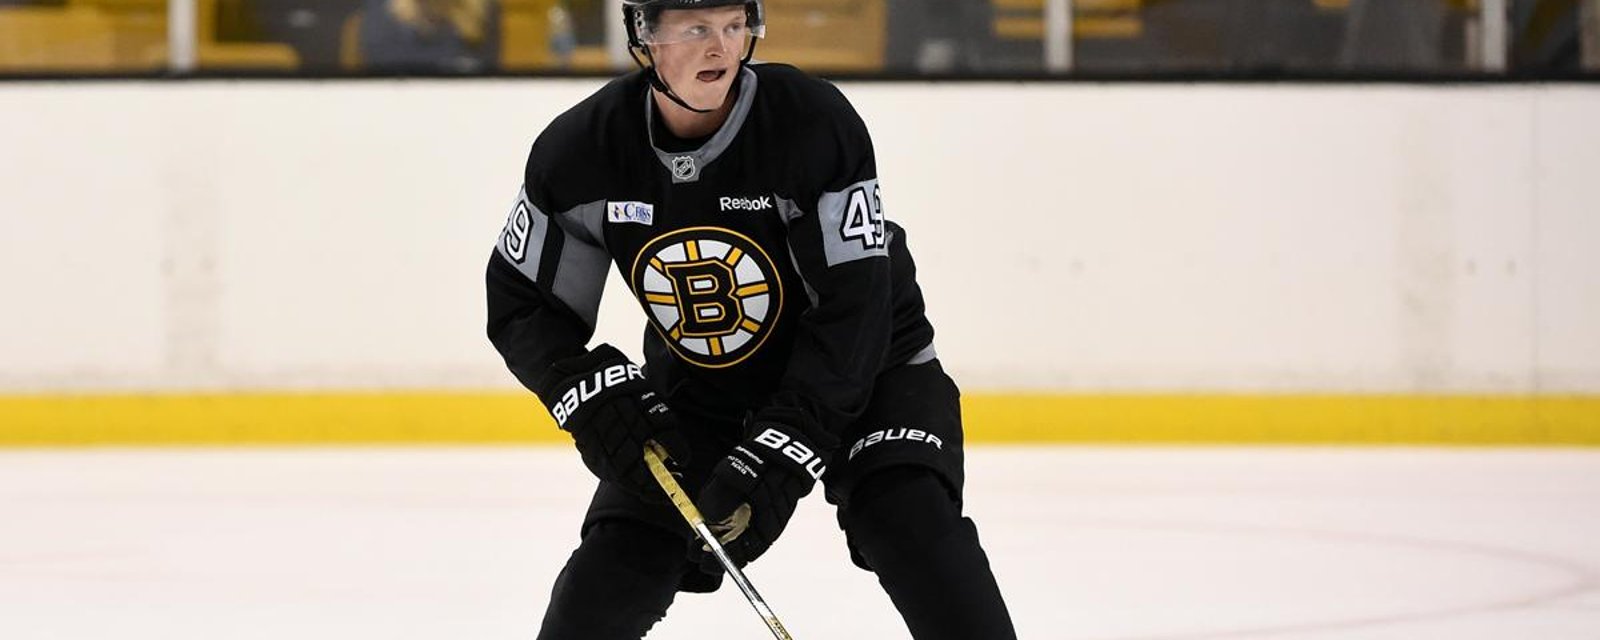 Bruins top prospect returns home following disappointing results. 